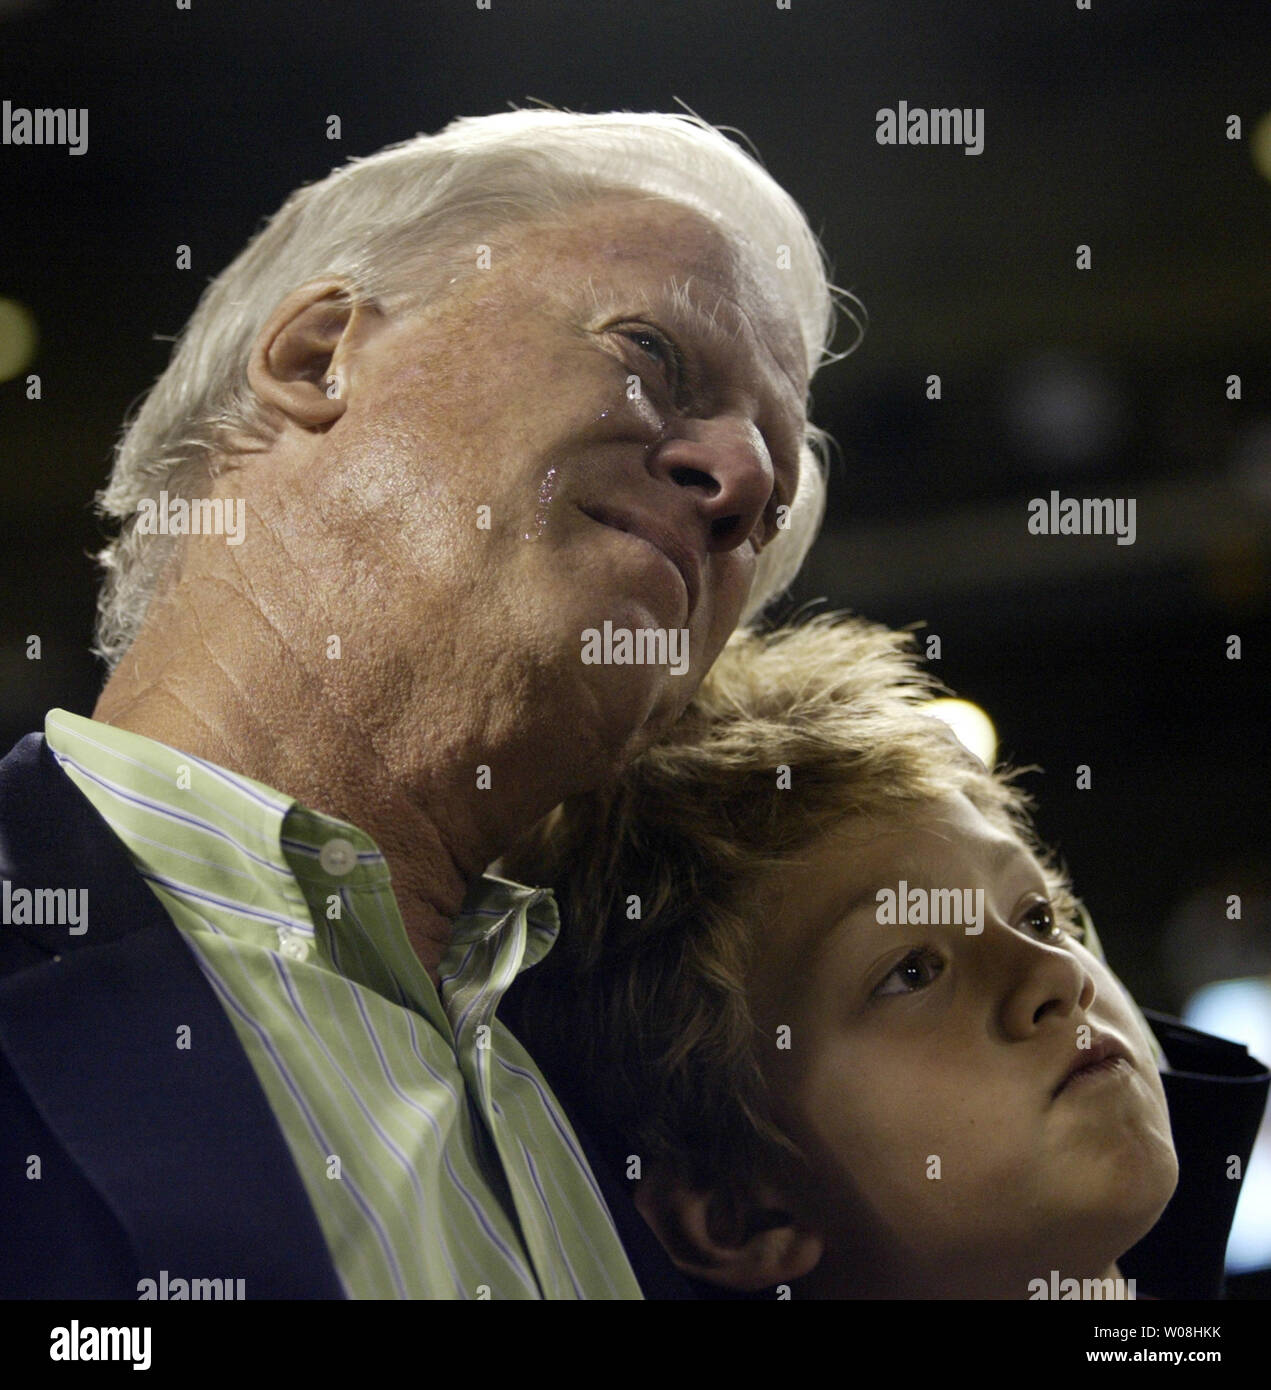 San Francisco Giants owner Peter McGowan cries as he hugs his grandson Alexander Harper following Barry Bonds last at bat in his final game at AT&T Park in San Francisco on September 26, 2007.  Bonds went 0-3 against the San Diego Padres.  (UPI Photo/Bruce Gordon) Stock Photo